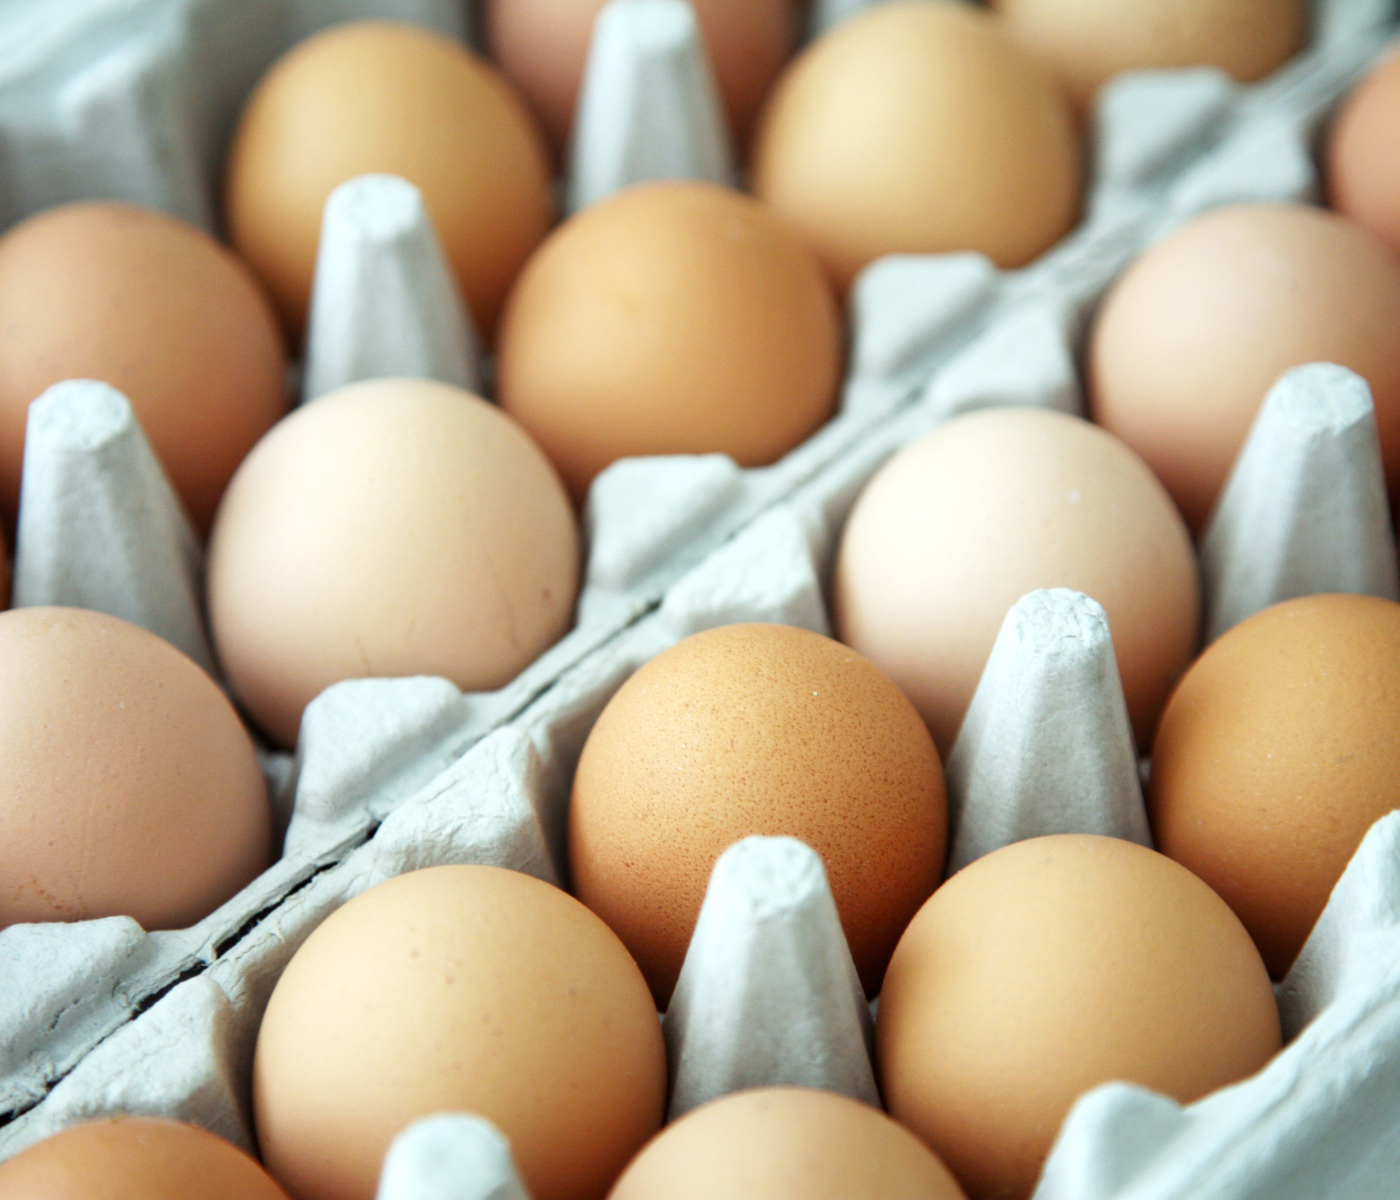 Australian Eggs shores up food security with new technology